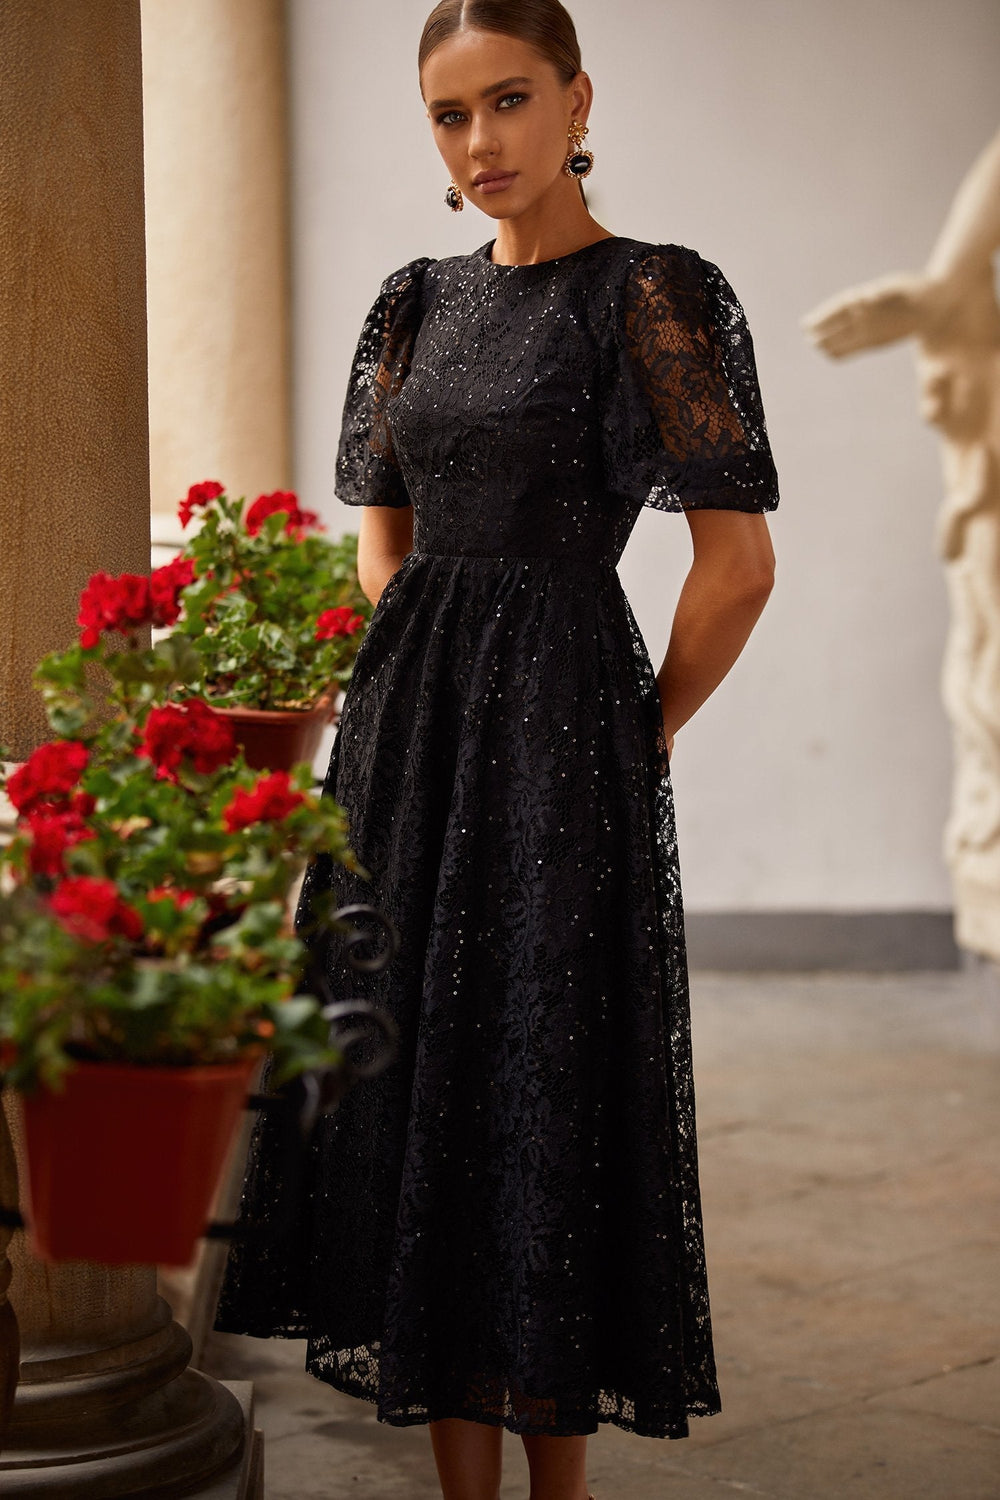 Manon Black Lace Dress with Lace-Up Back